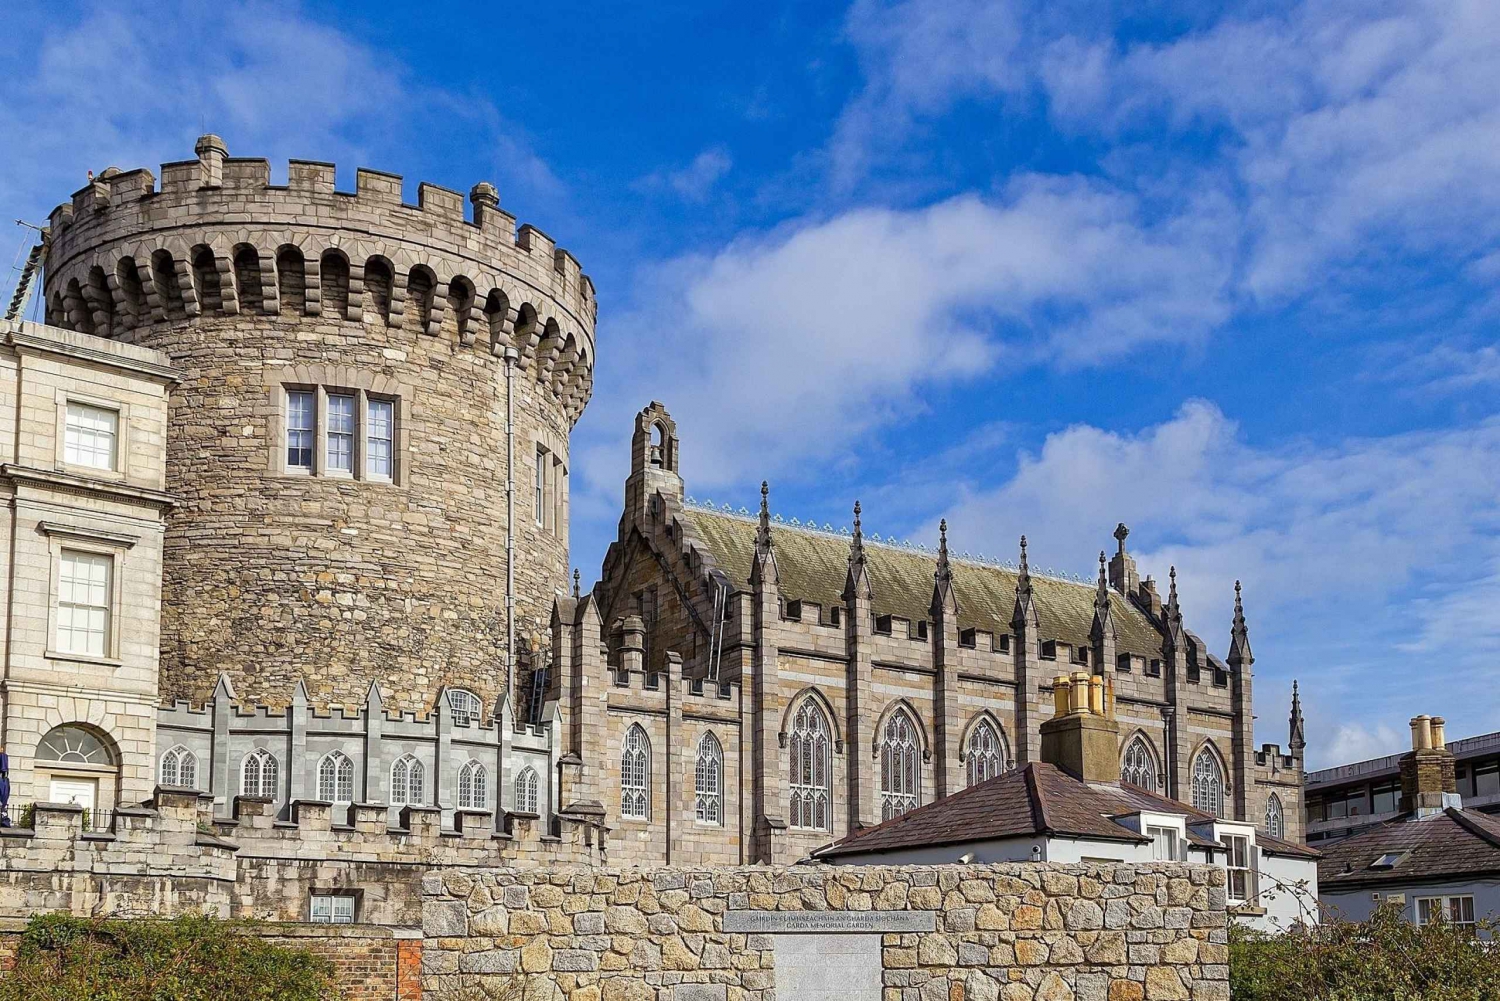 Dublin: Audio Guide Tour with 26 Attraction Visits